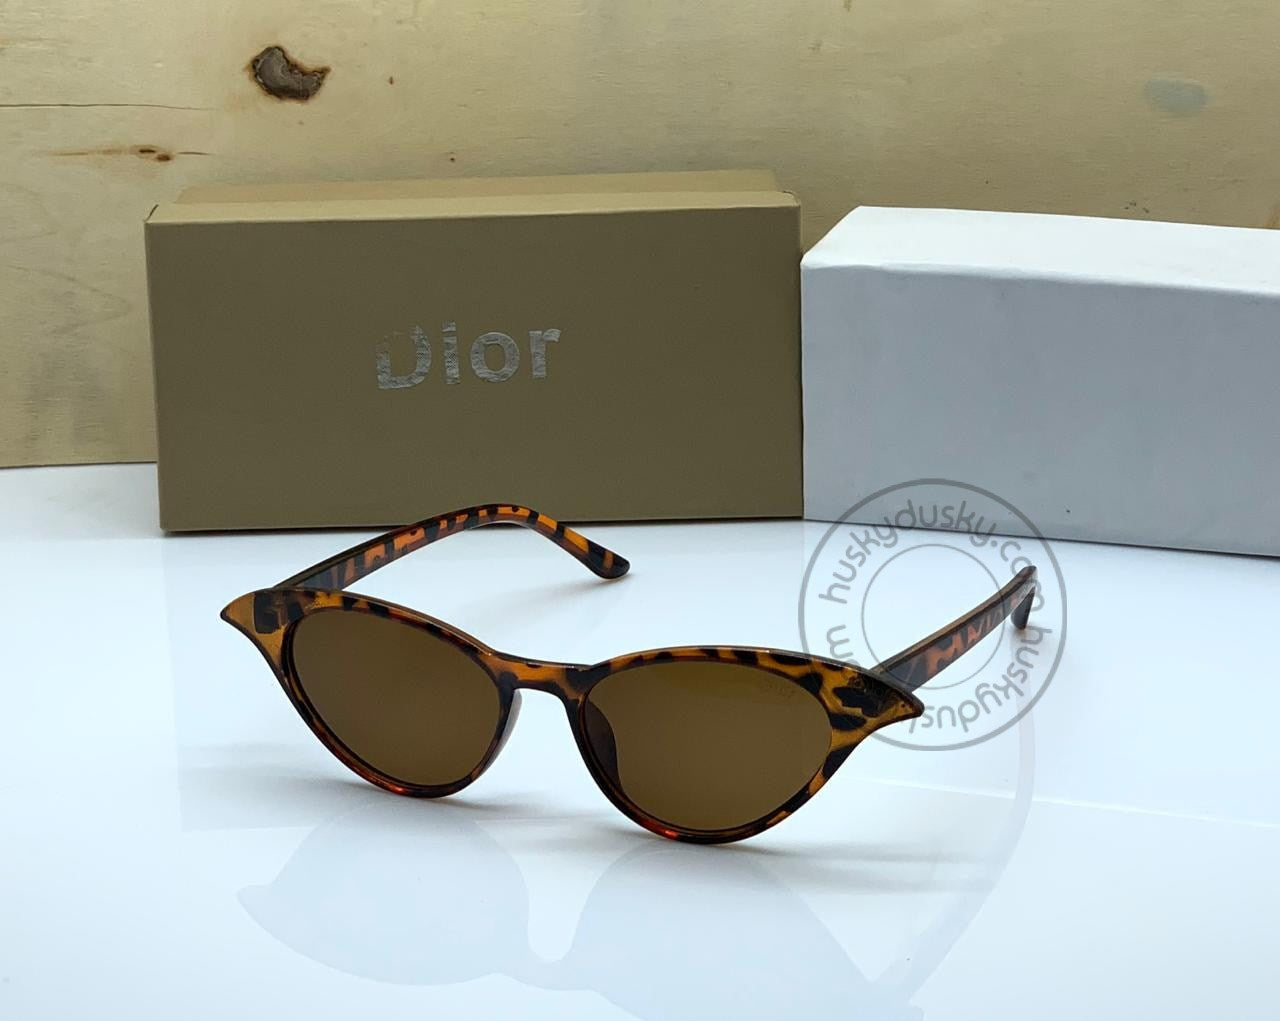 Dior Brown Glass Women's Sunglass for Woman or Girl DR-123 Tiger Print Frame Gift Sunglass